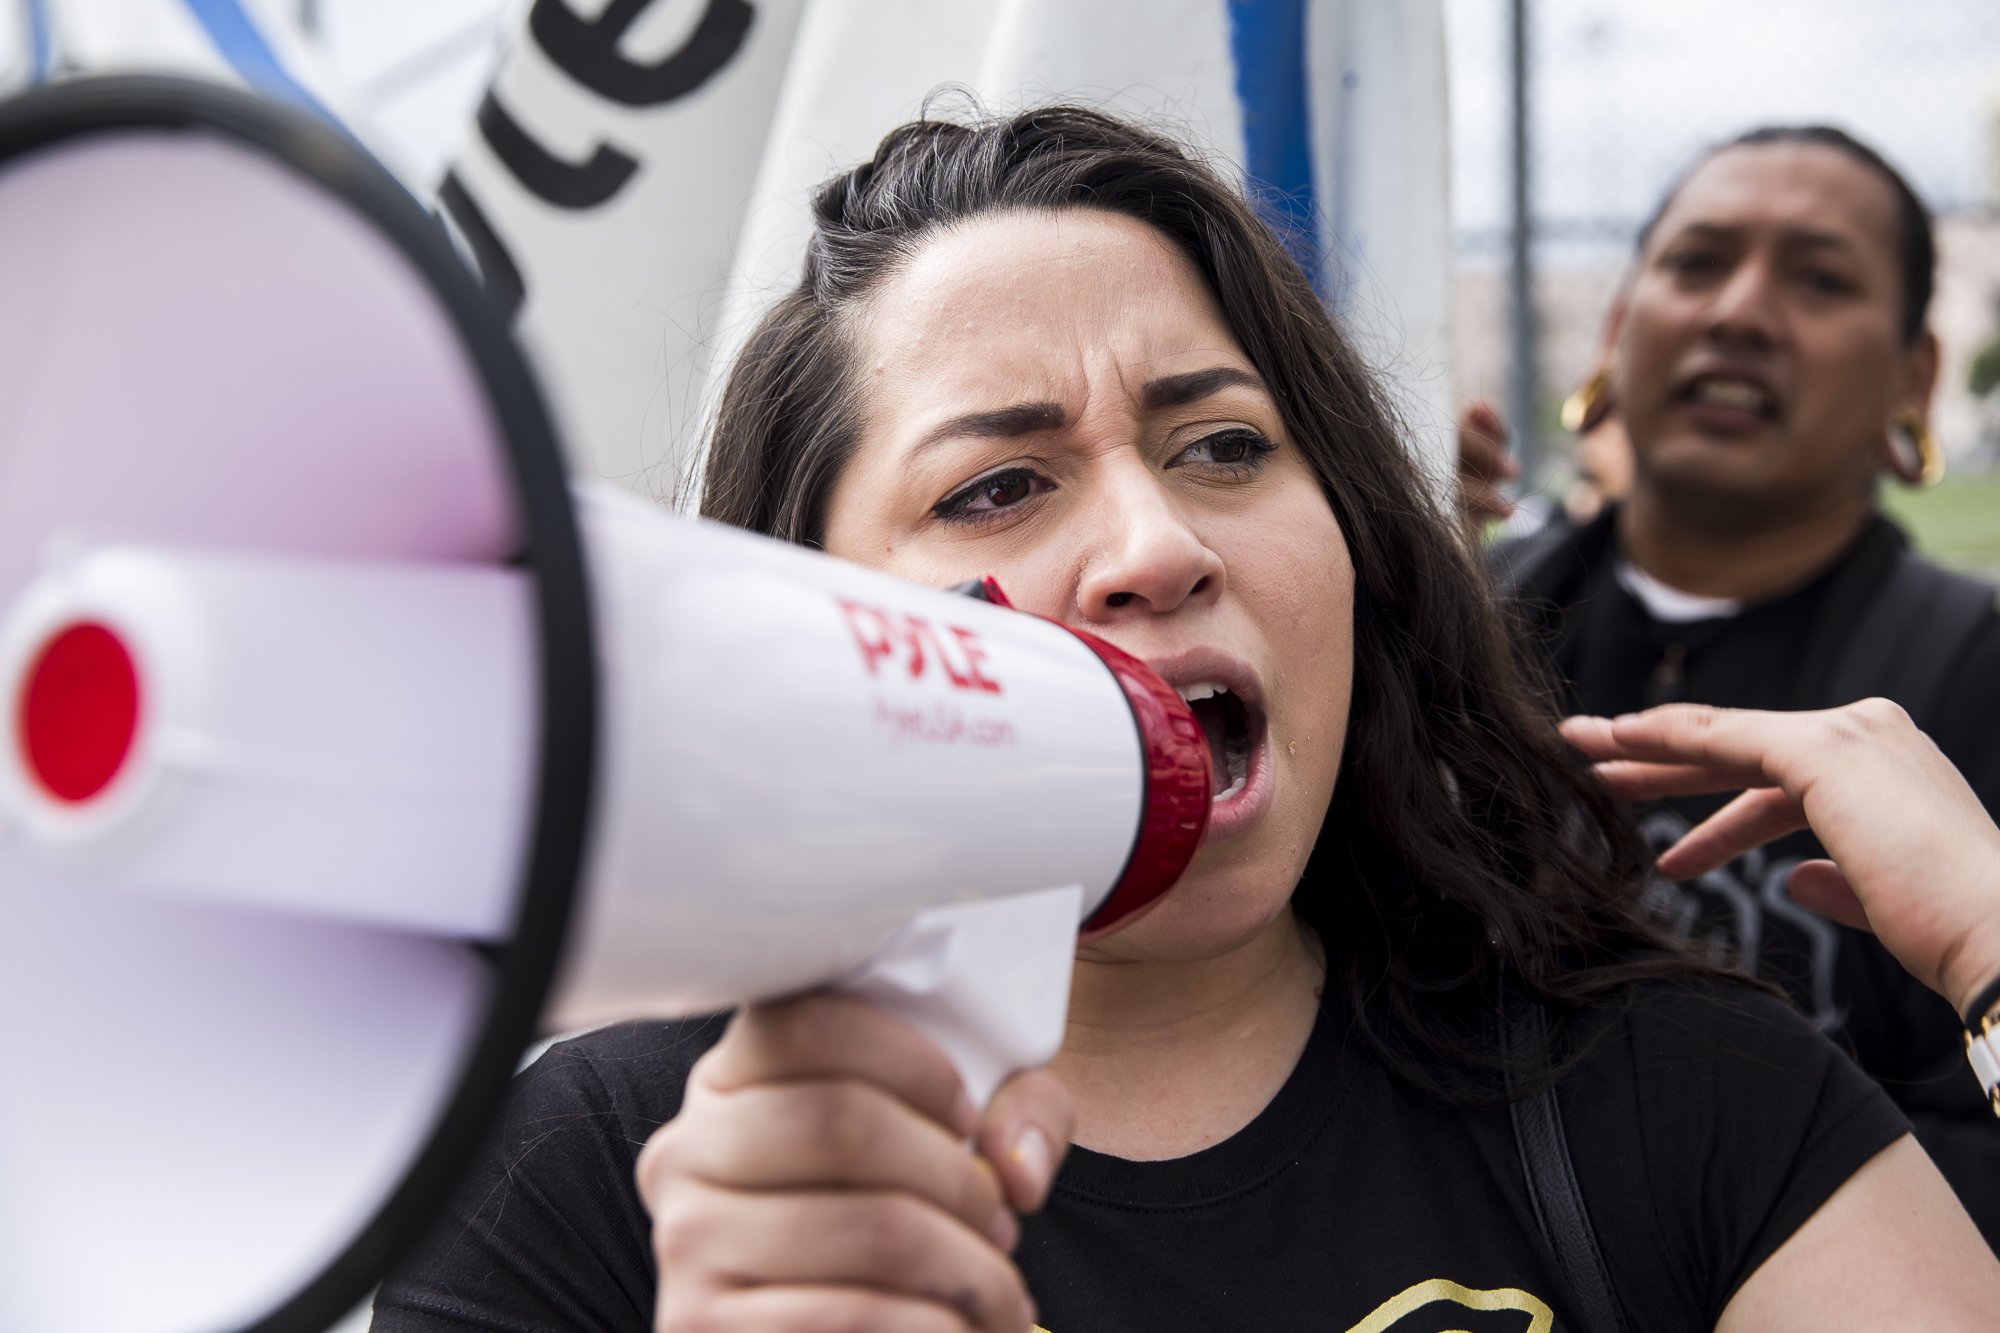  Movimiento Cosecha member and community organizer Claudia Treminio chants and sings into a megaphone while marching down 7th street from MacArther Park during the undocumented immigrant mother’s rally that took place in downtown Los Angeles, Califor